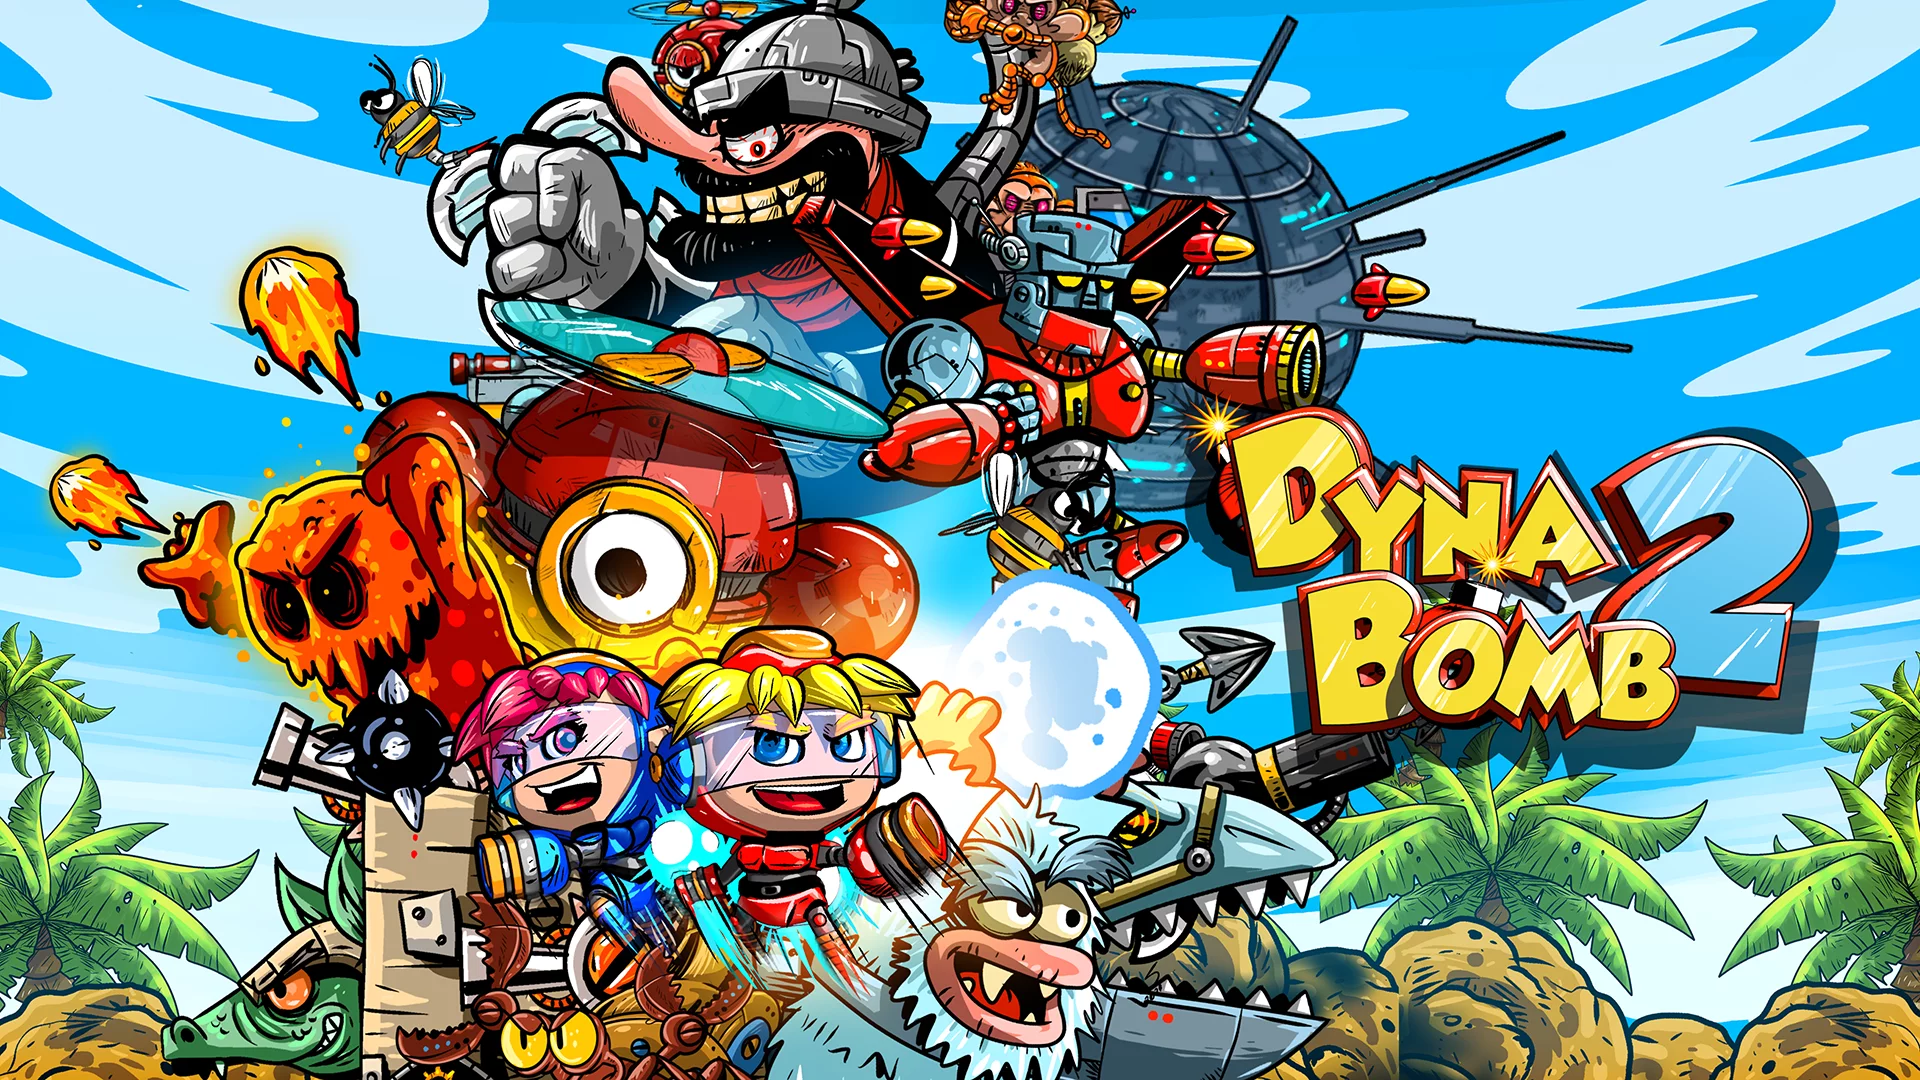 Dyna Bomb 2 player count statistics facts